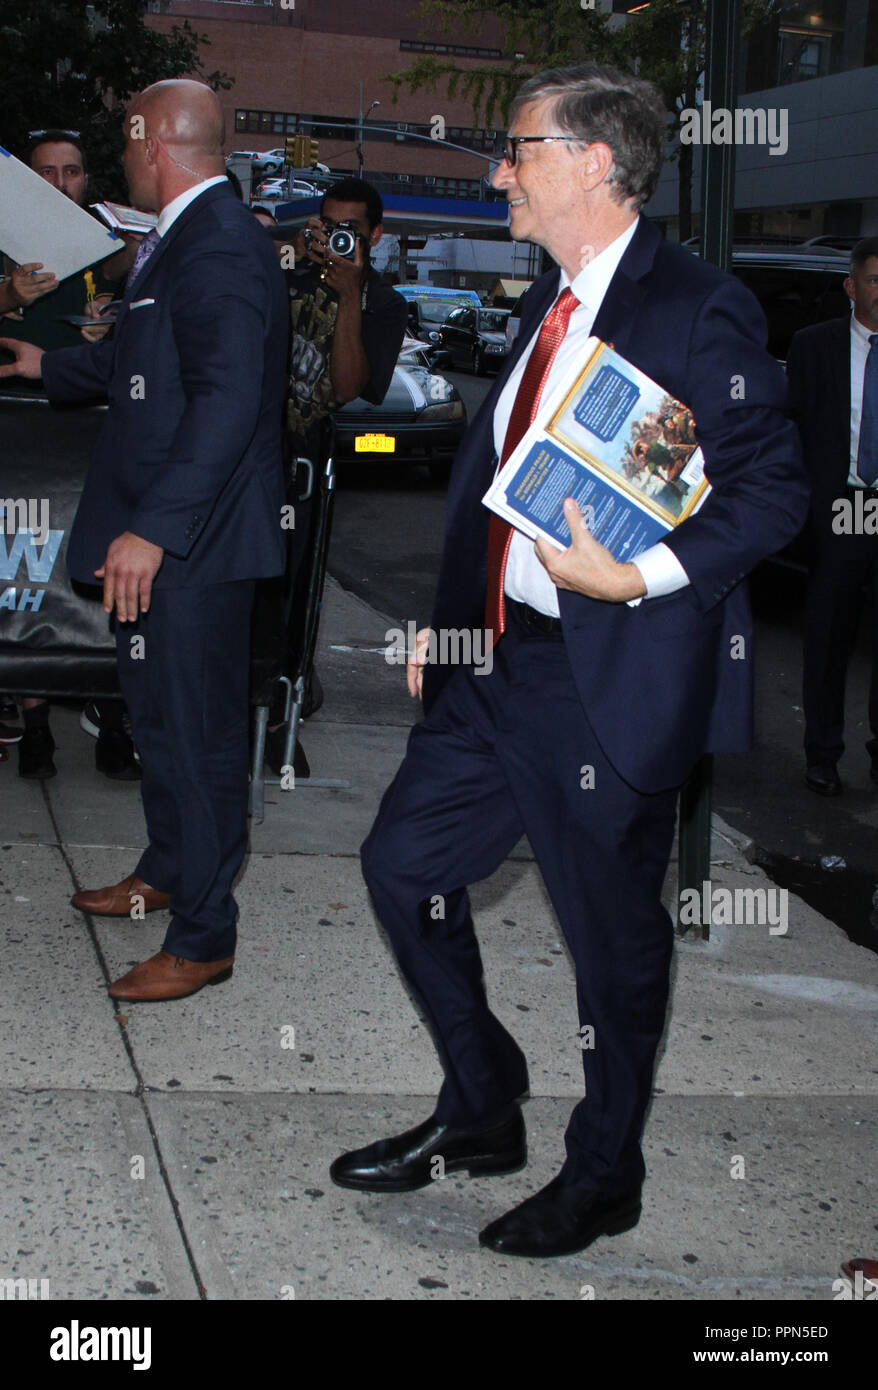 New York, NY, USA. 26th Sep, 2018. Bill Gates at The Daily Show with Trevor Noah holding a copy of The Donald J. Trump Presidential Twitter Library on September 26, 2018 in New York City. Credit: Rw/Media Punch/Alamy Live News Stock Photo